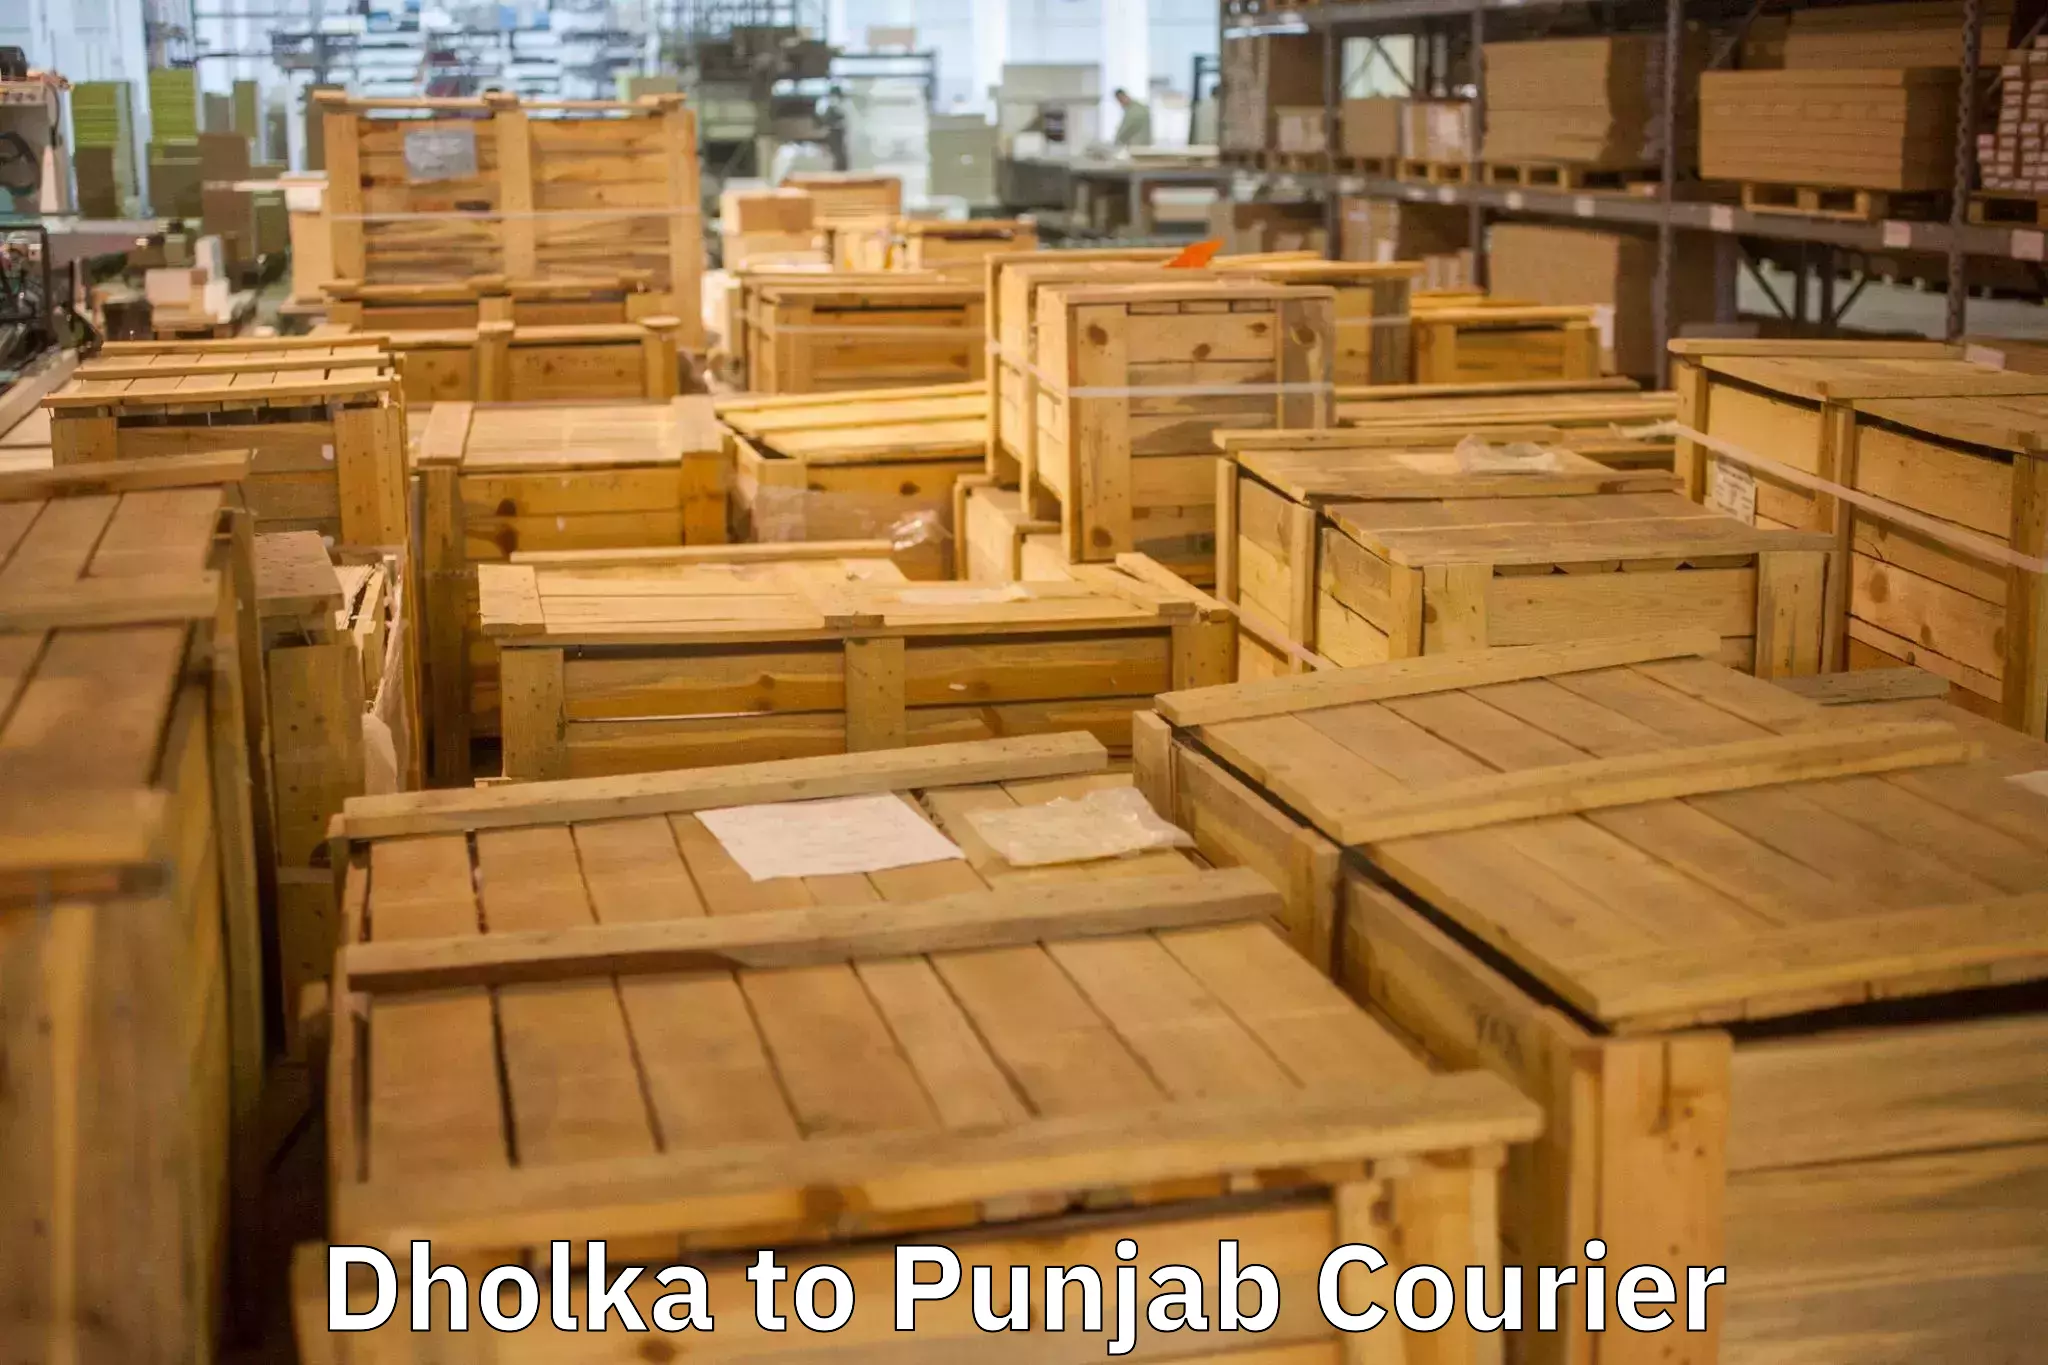 Reliable relocation services Dholka to Punjab